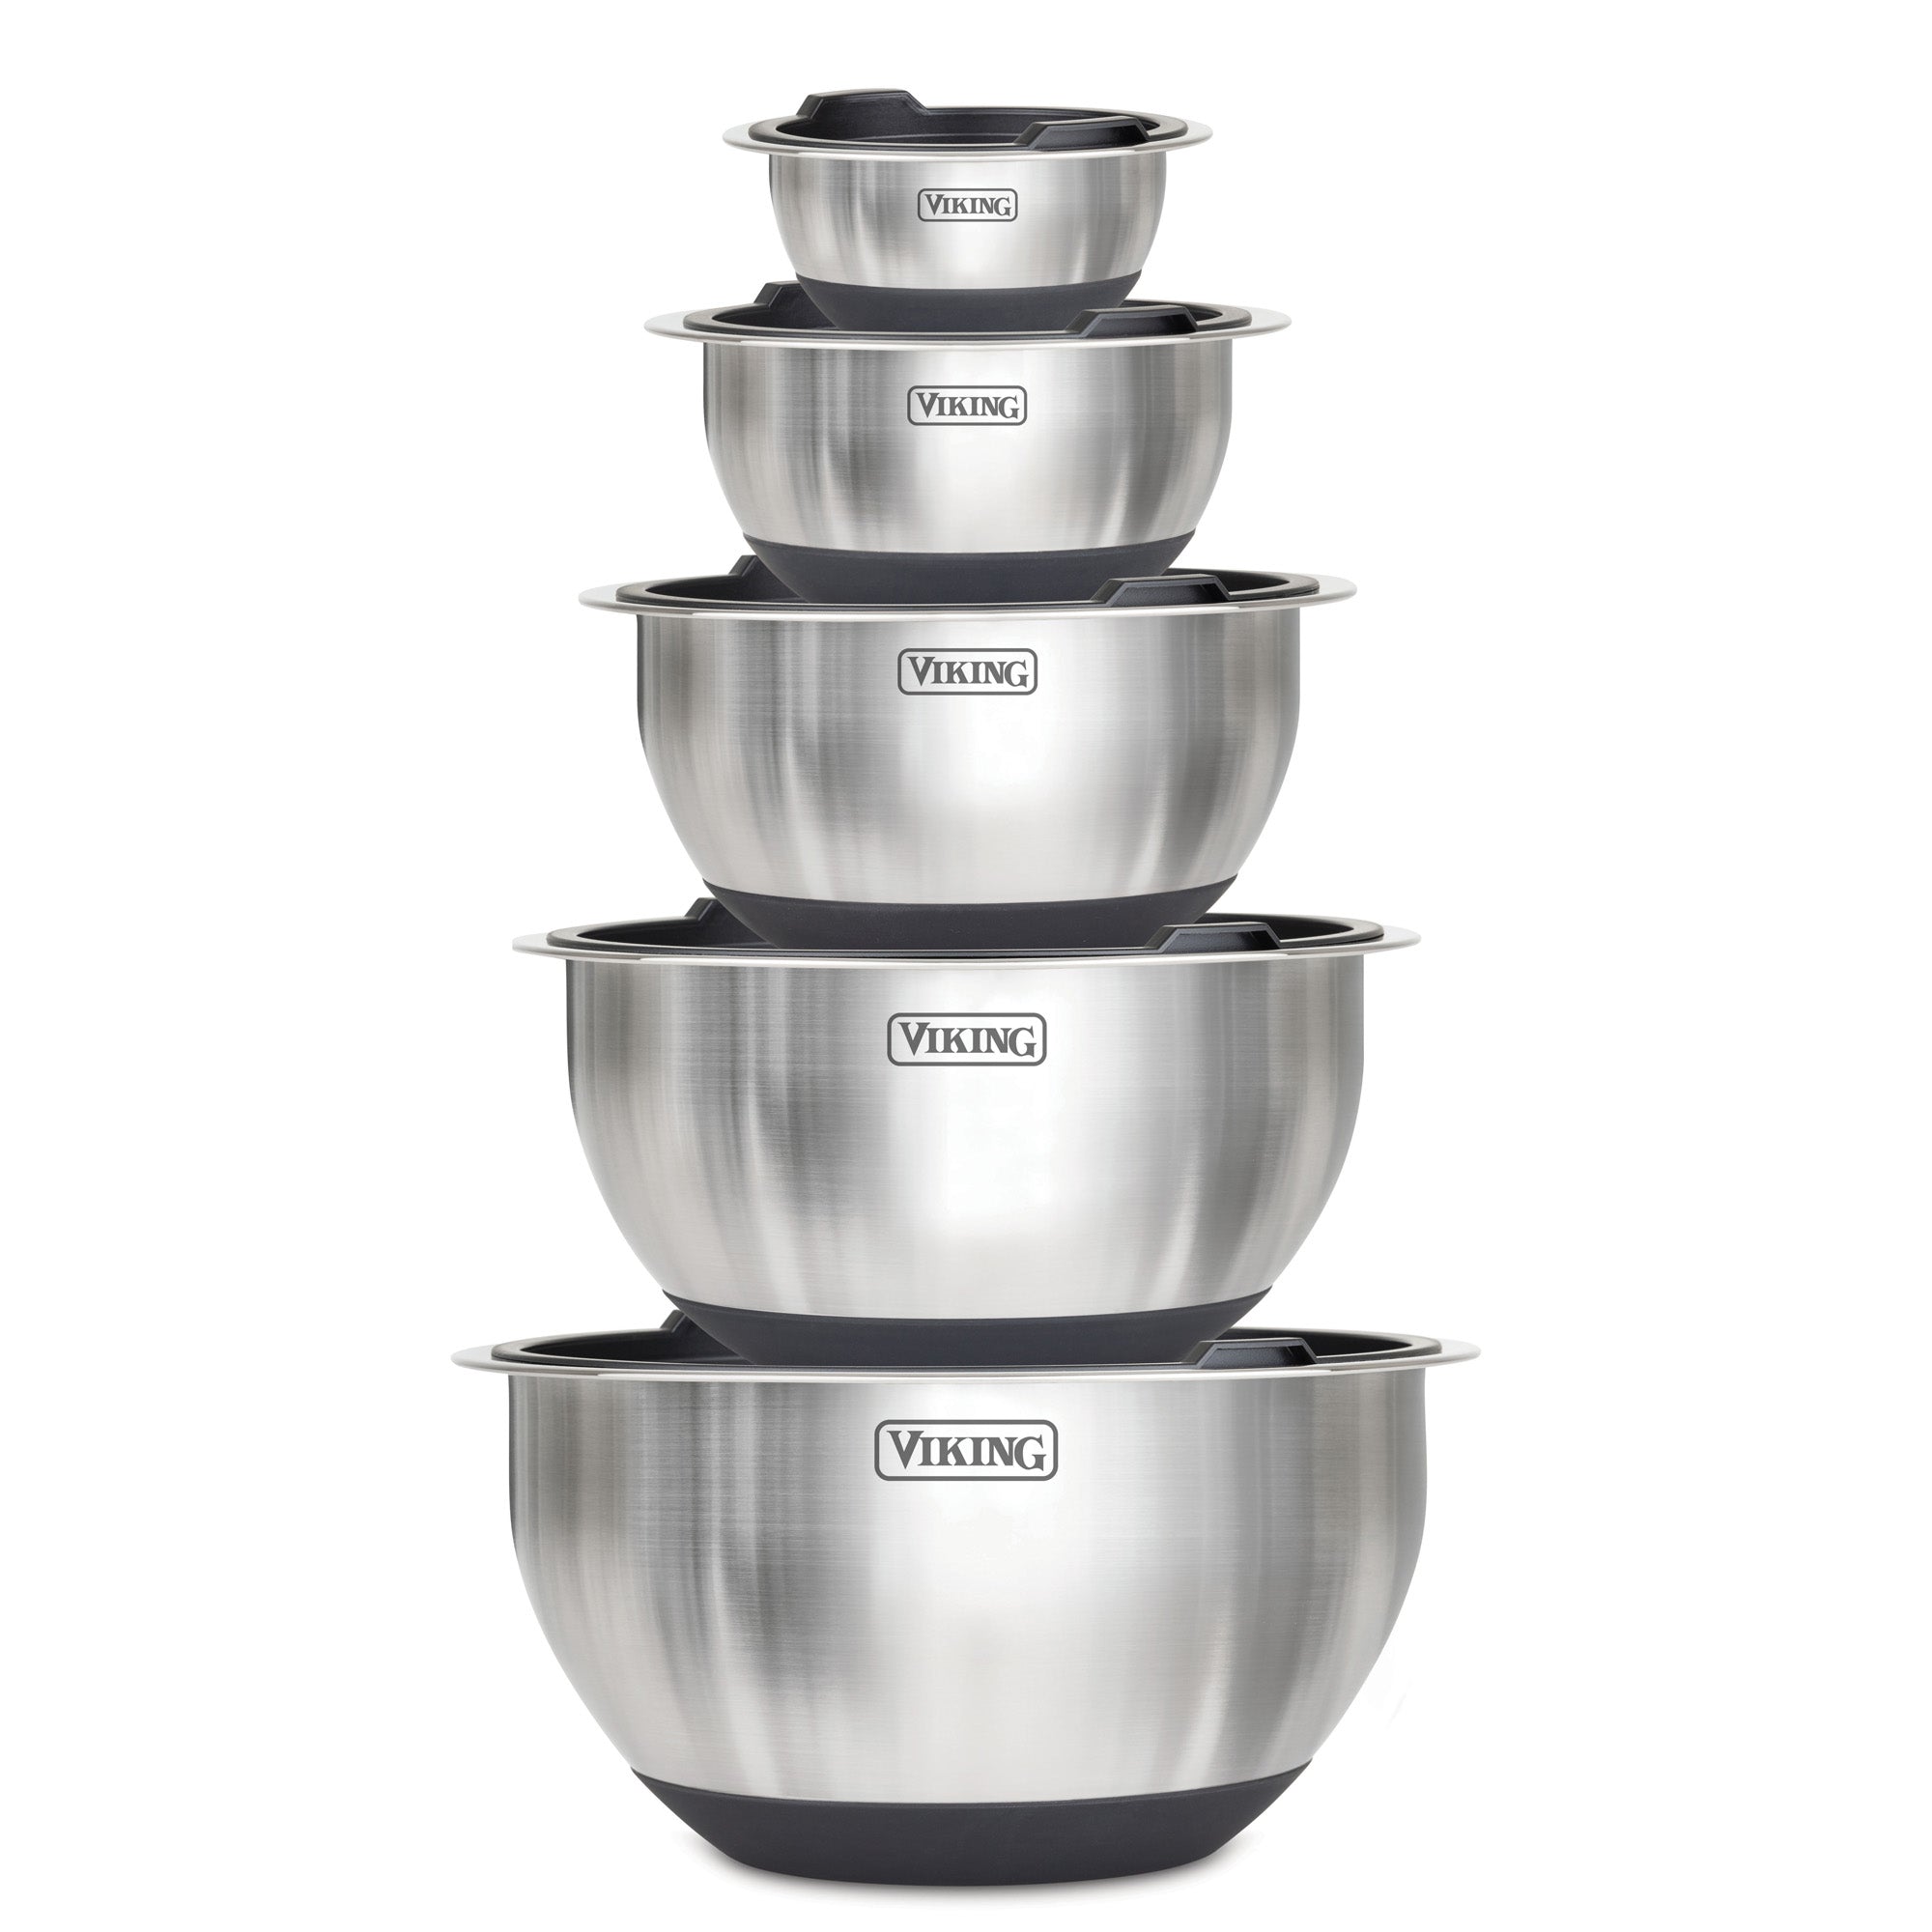 Heavy Duty Stainless Steel Mixing Bowl - 13 quart